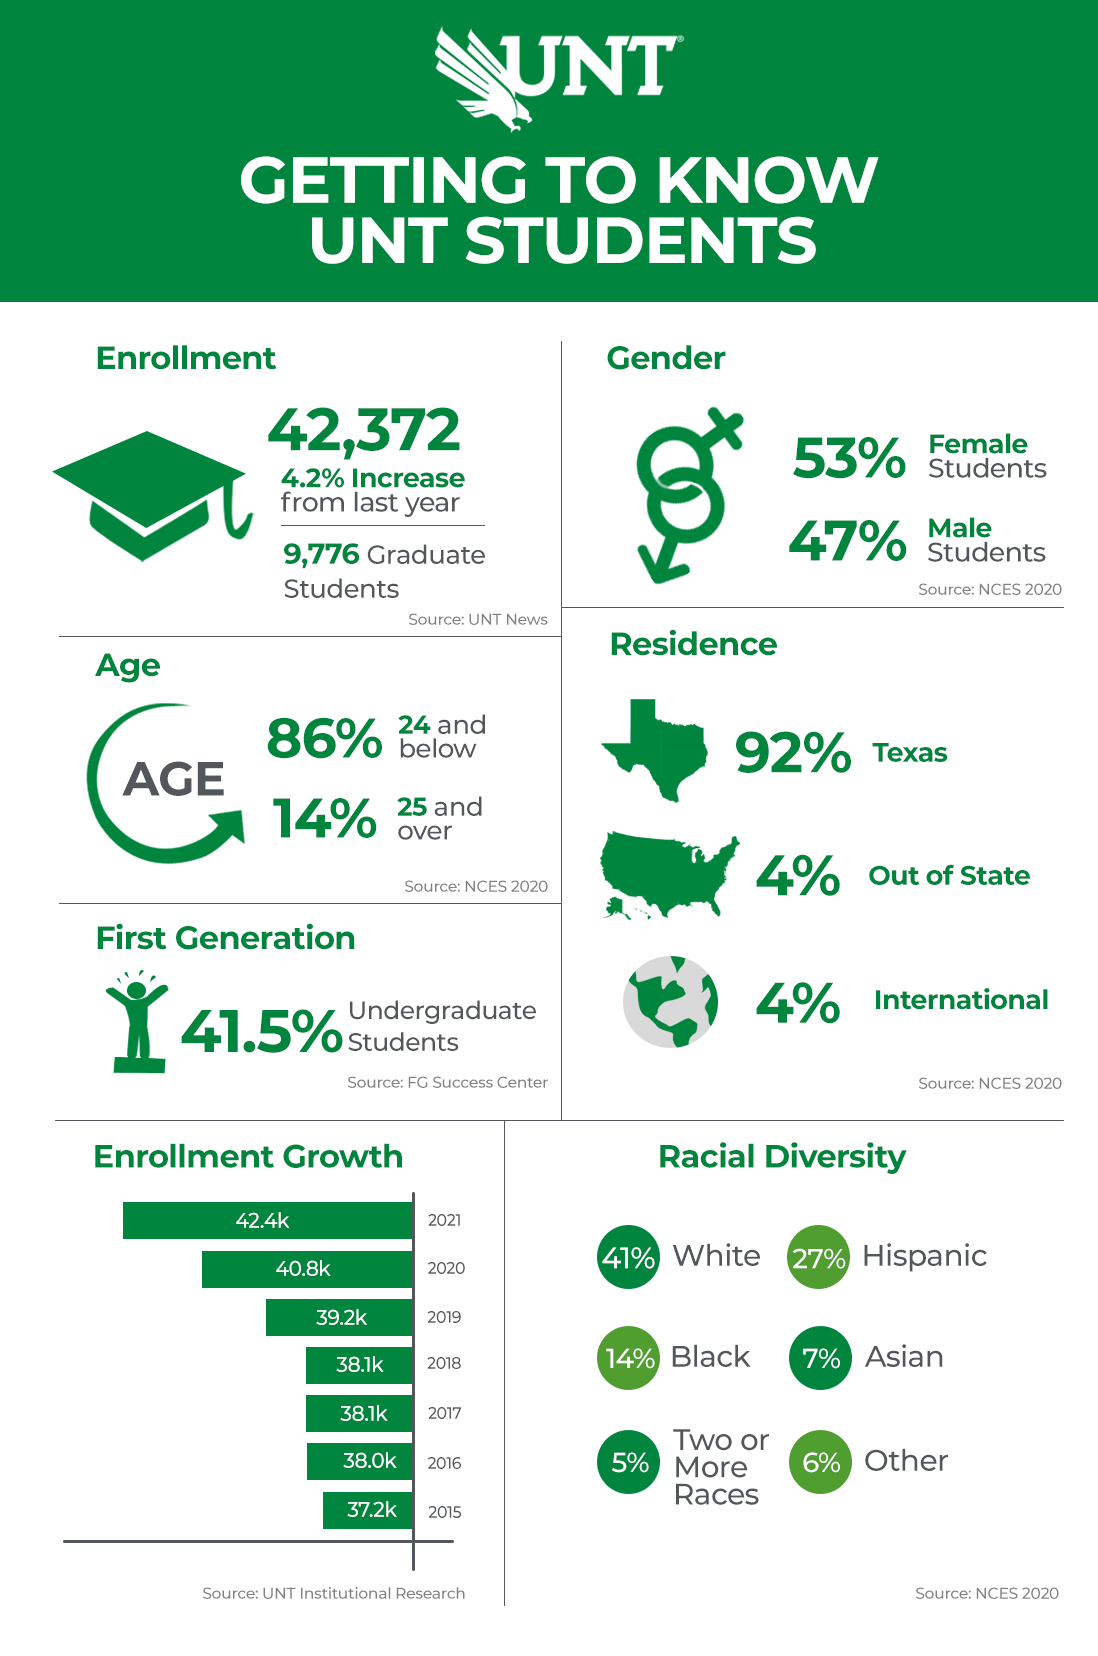 UNT Student Demographics: Enrollment is 42,372, a 4.2% enrollment increase from last year. Gender distribution: 54% female and 47% male. 86% of UNT students are 24 and below and 14% 25 and over. 92% live in Texas, 4% out of state, and 4% international. Racial diversity is 27% Hispanic, 14% Black, 6% Asian, and 41% White. (NCES 2020)